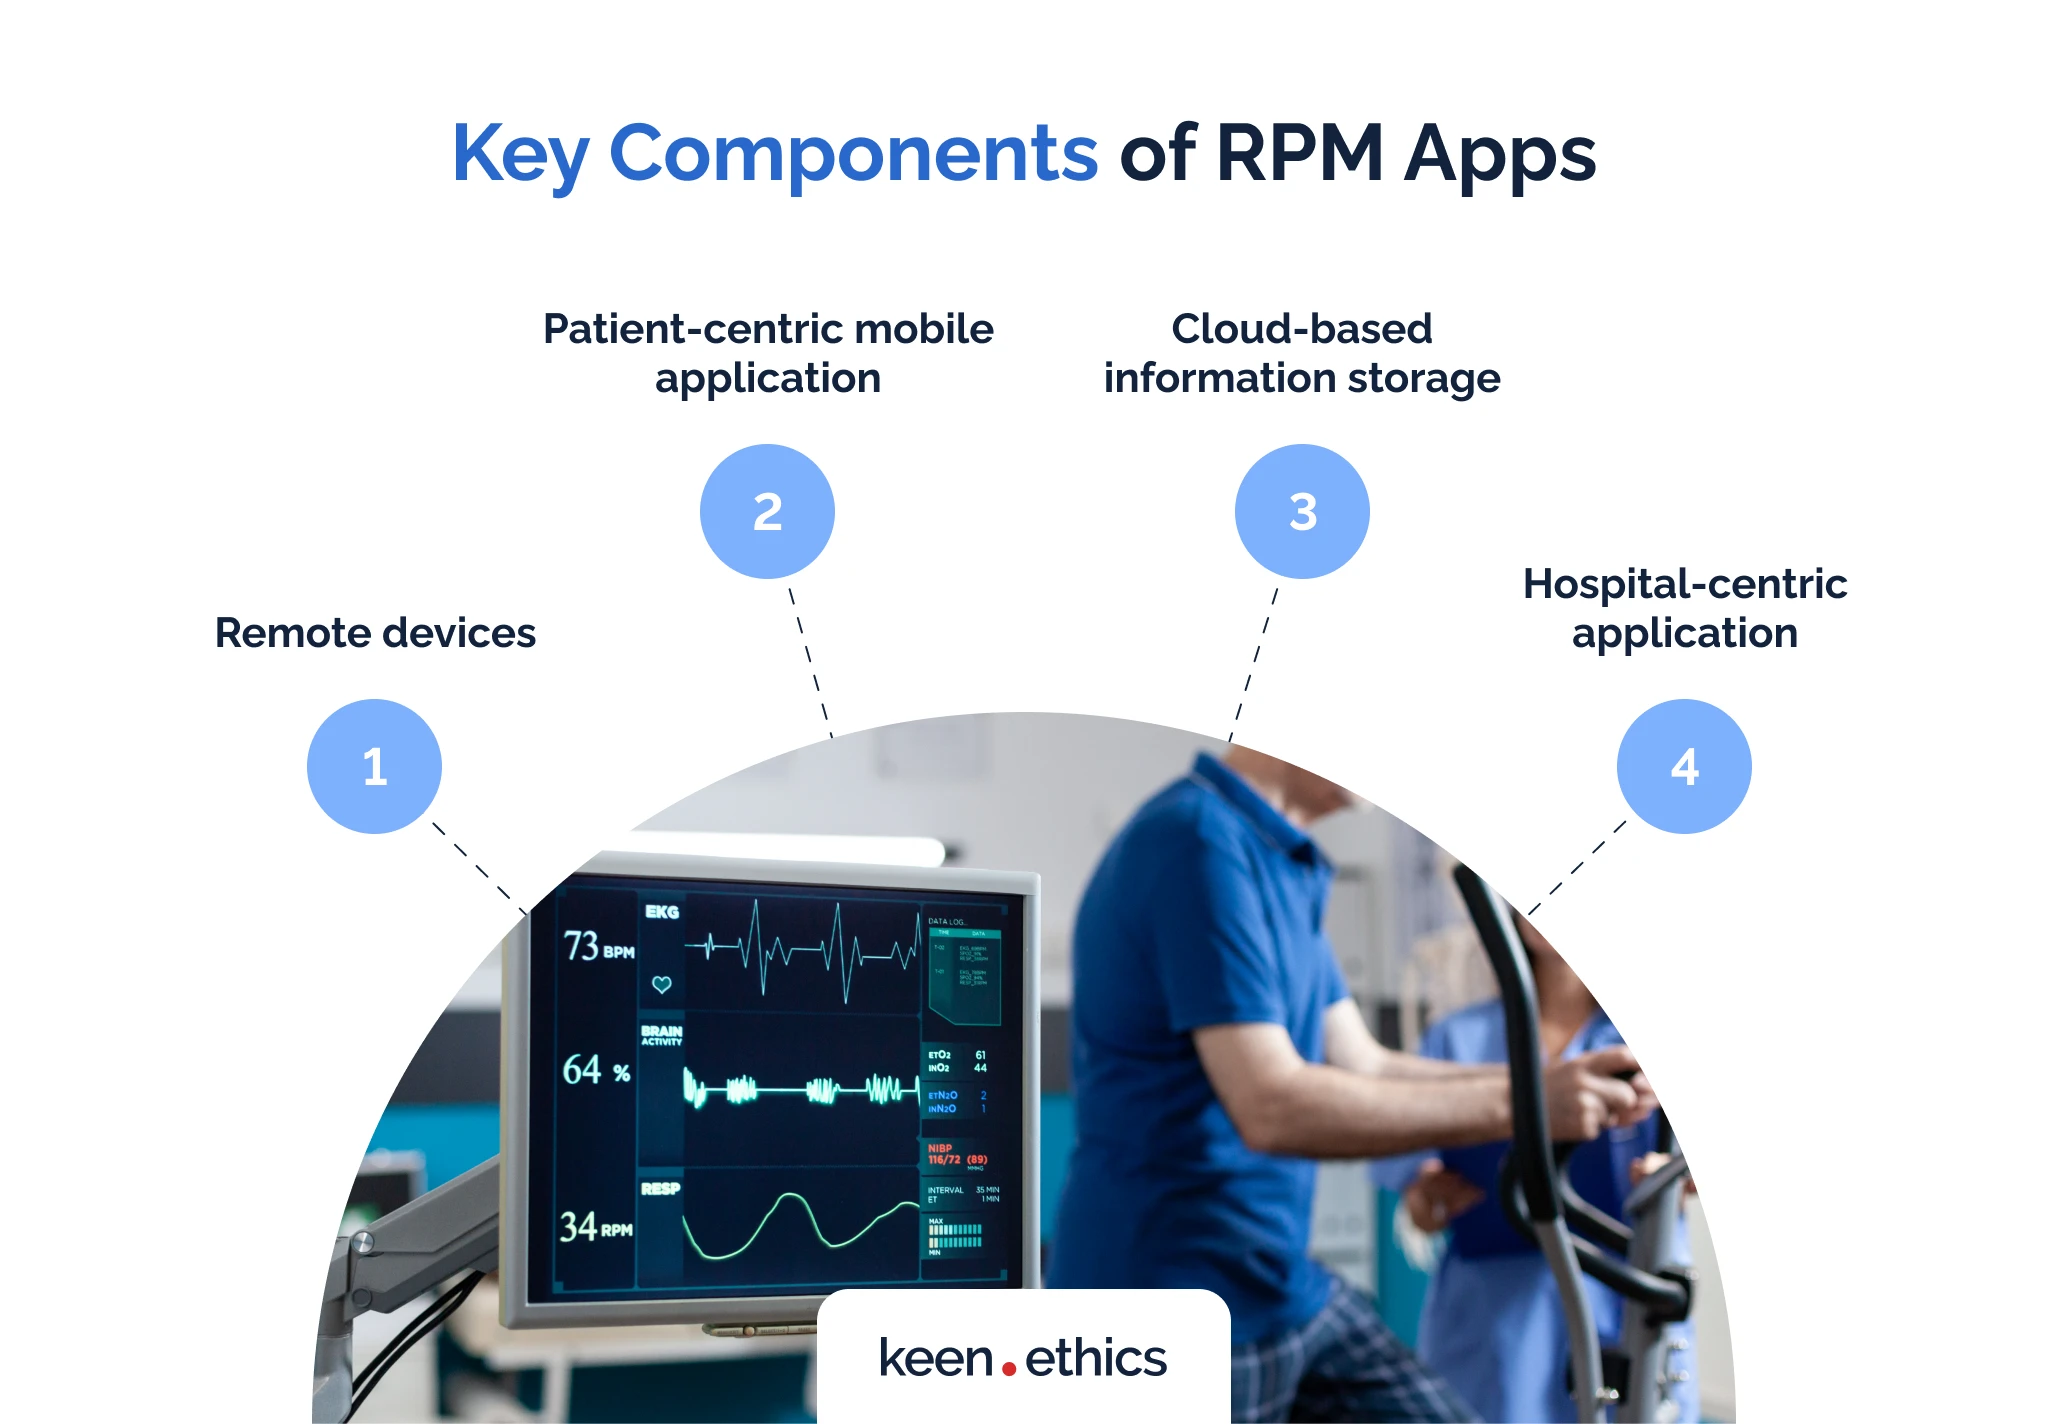 Key components of RPM apps